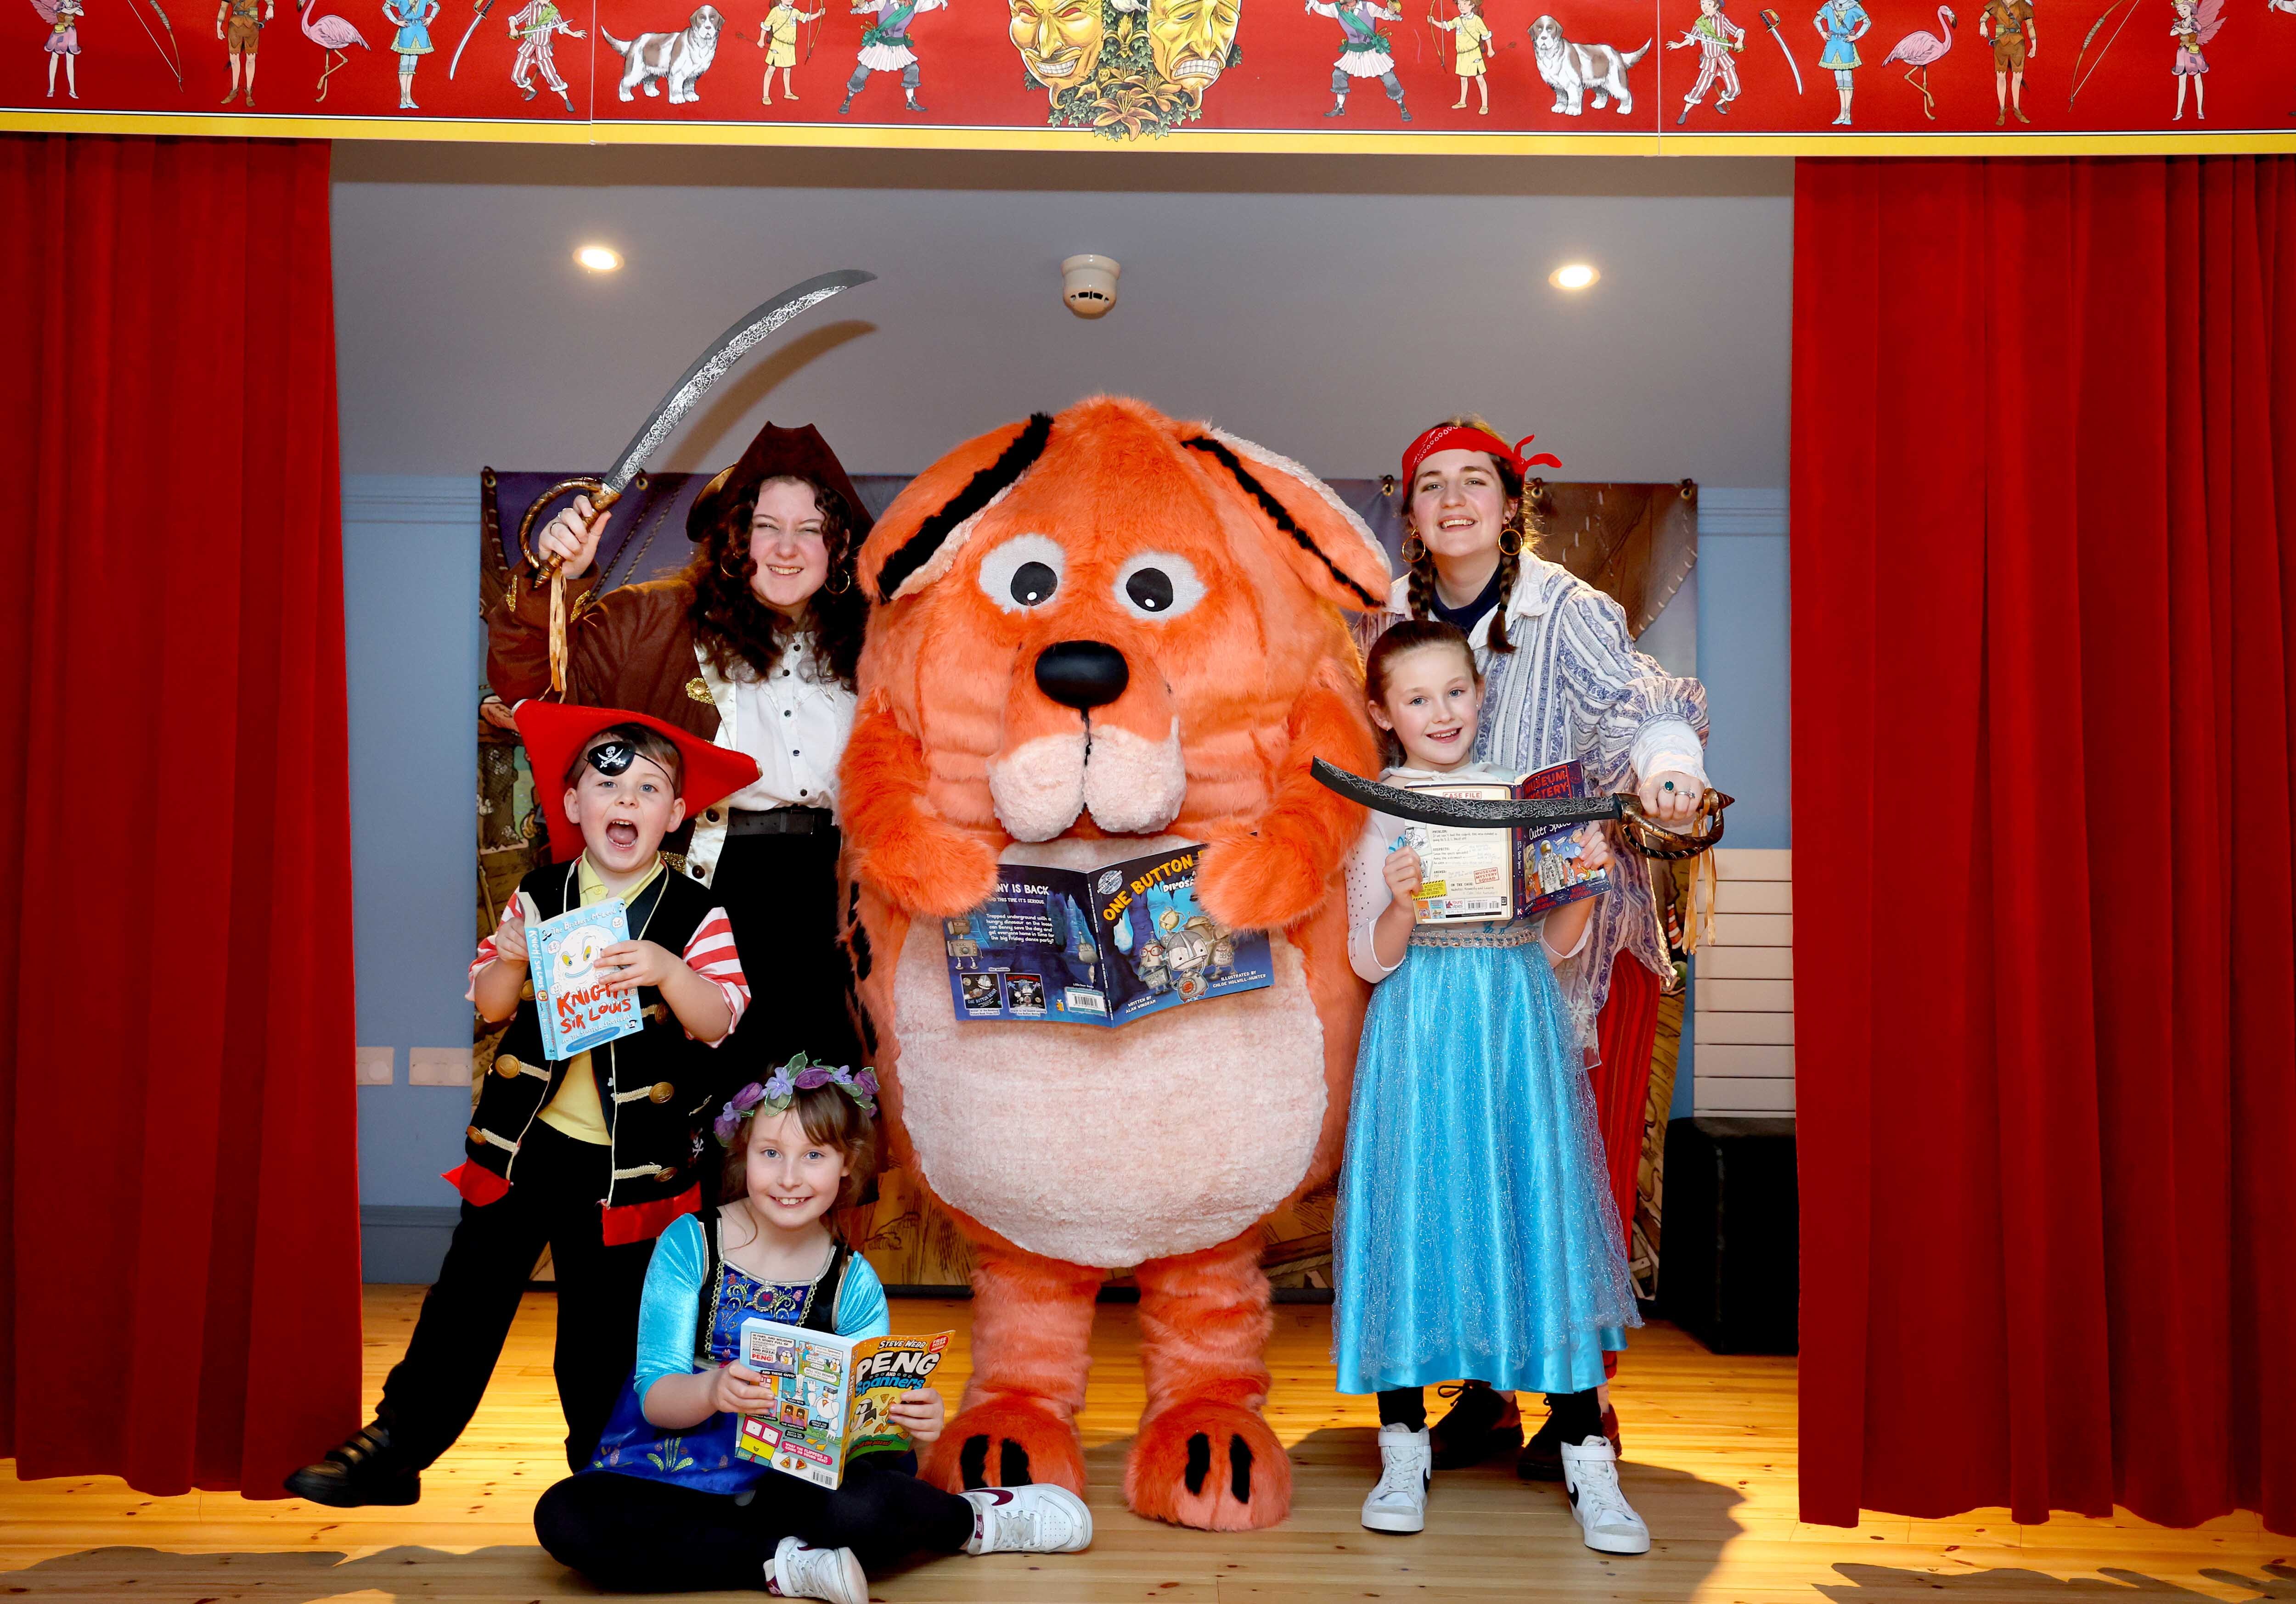 The Big DoG mascot is surrounded by children wearing matching orange dog ears and the Moat Brae Storyweavers dressed as pirates. They are stood in the children's theatre at Moat Brae.